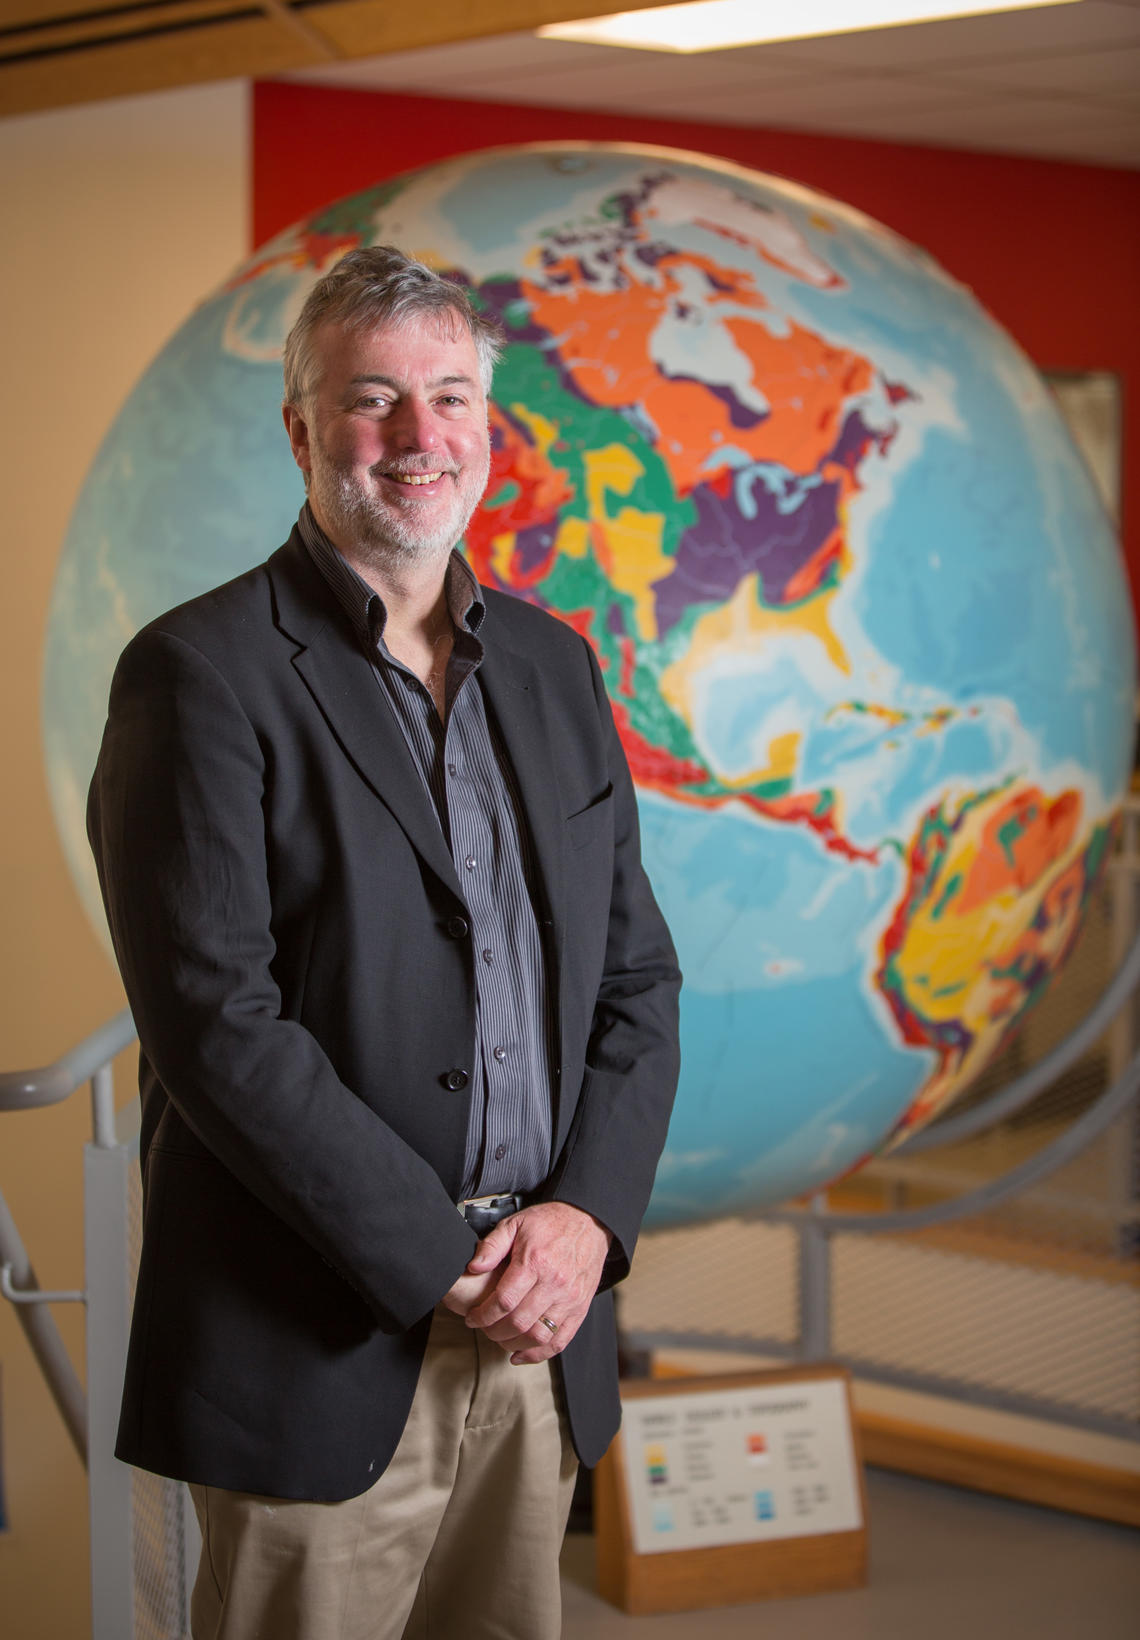 The University of Calgary's Eric Donovan says his call to Faculty of Science members to identify their strengths, their colleagues’ strengths, and the faculty’s capabilities yielded more than 350 responses.